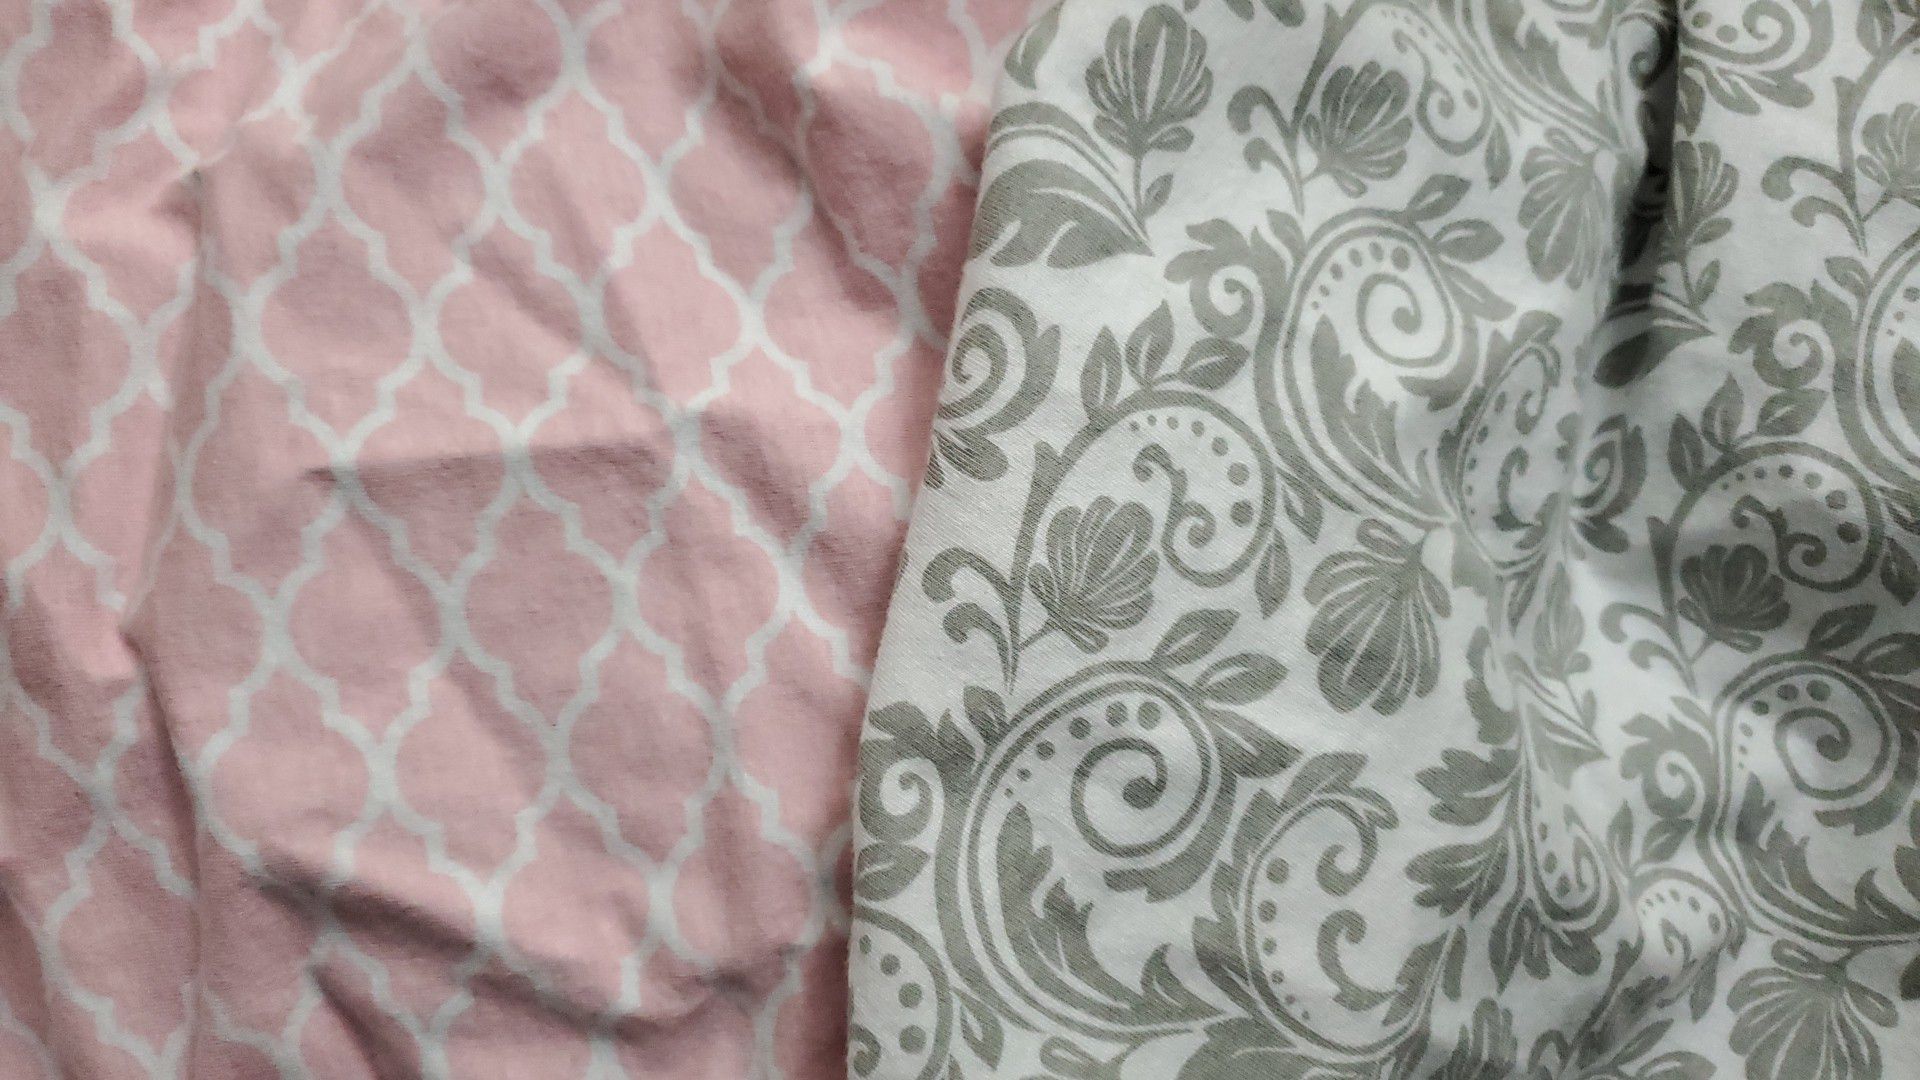 Changing table covers